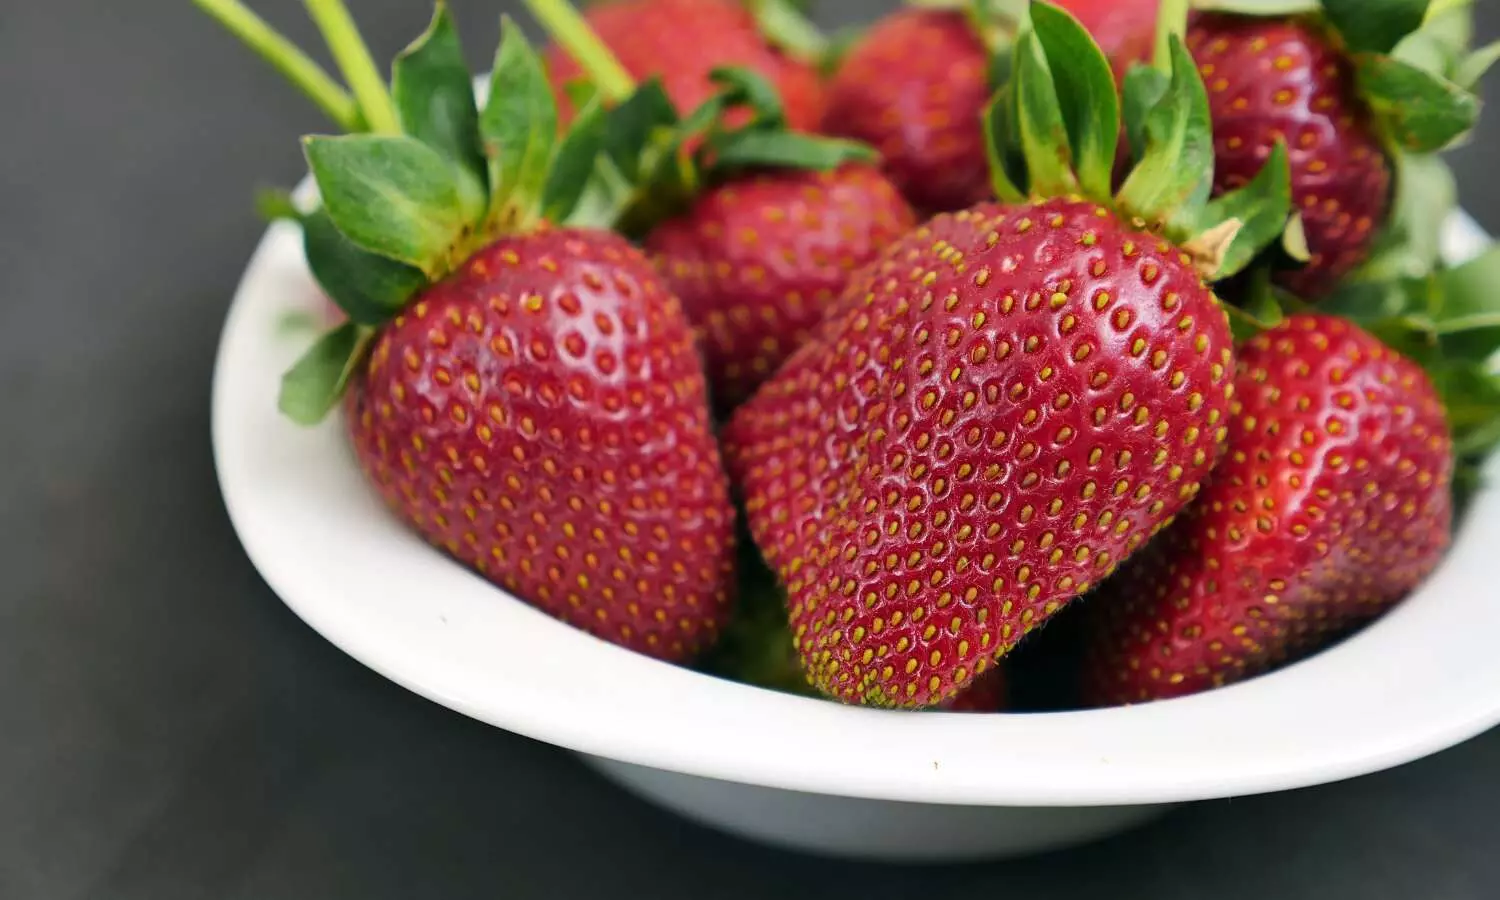 Strawberry consumption linked with potential heart health and cardiometabolic benefits